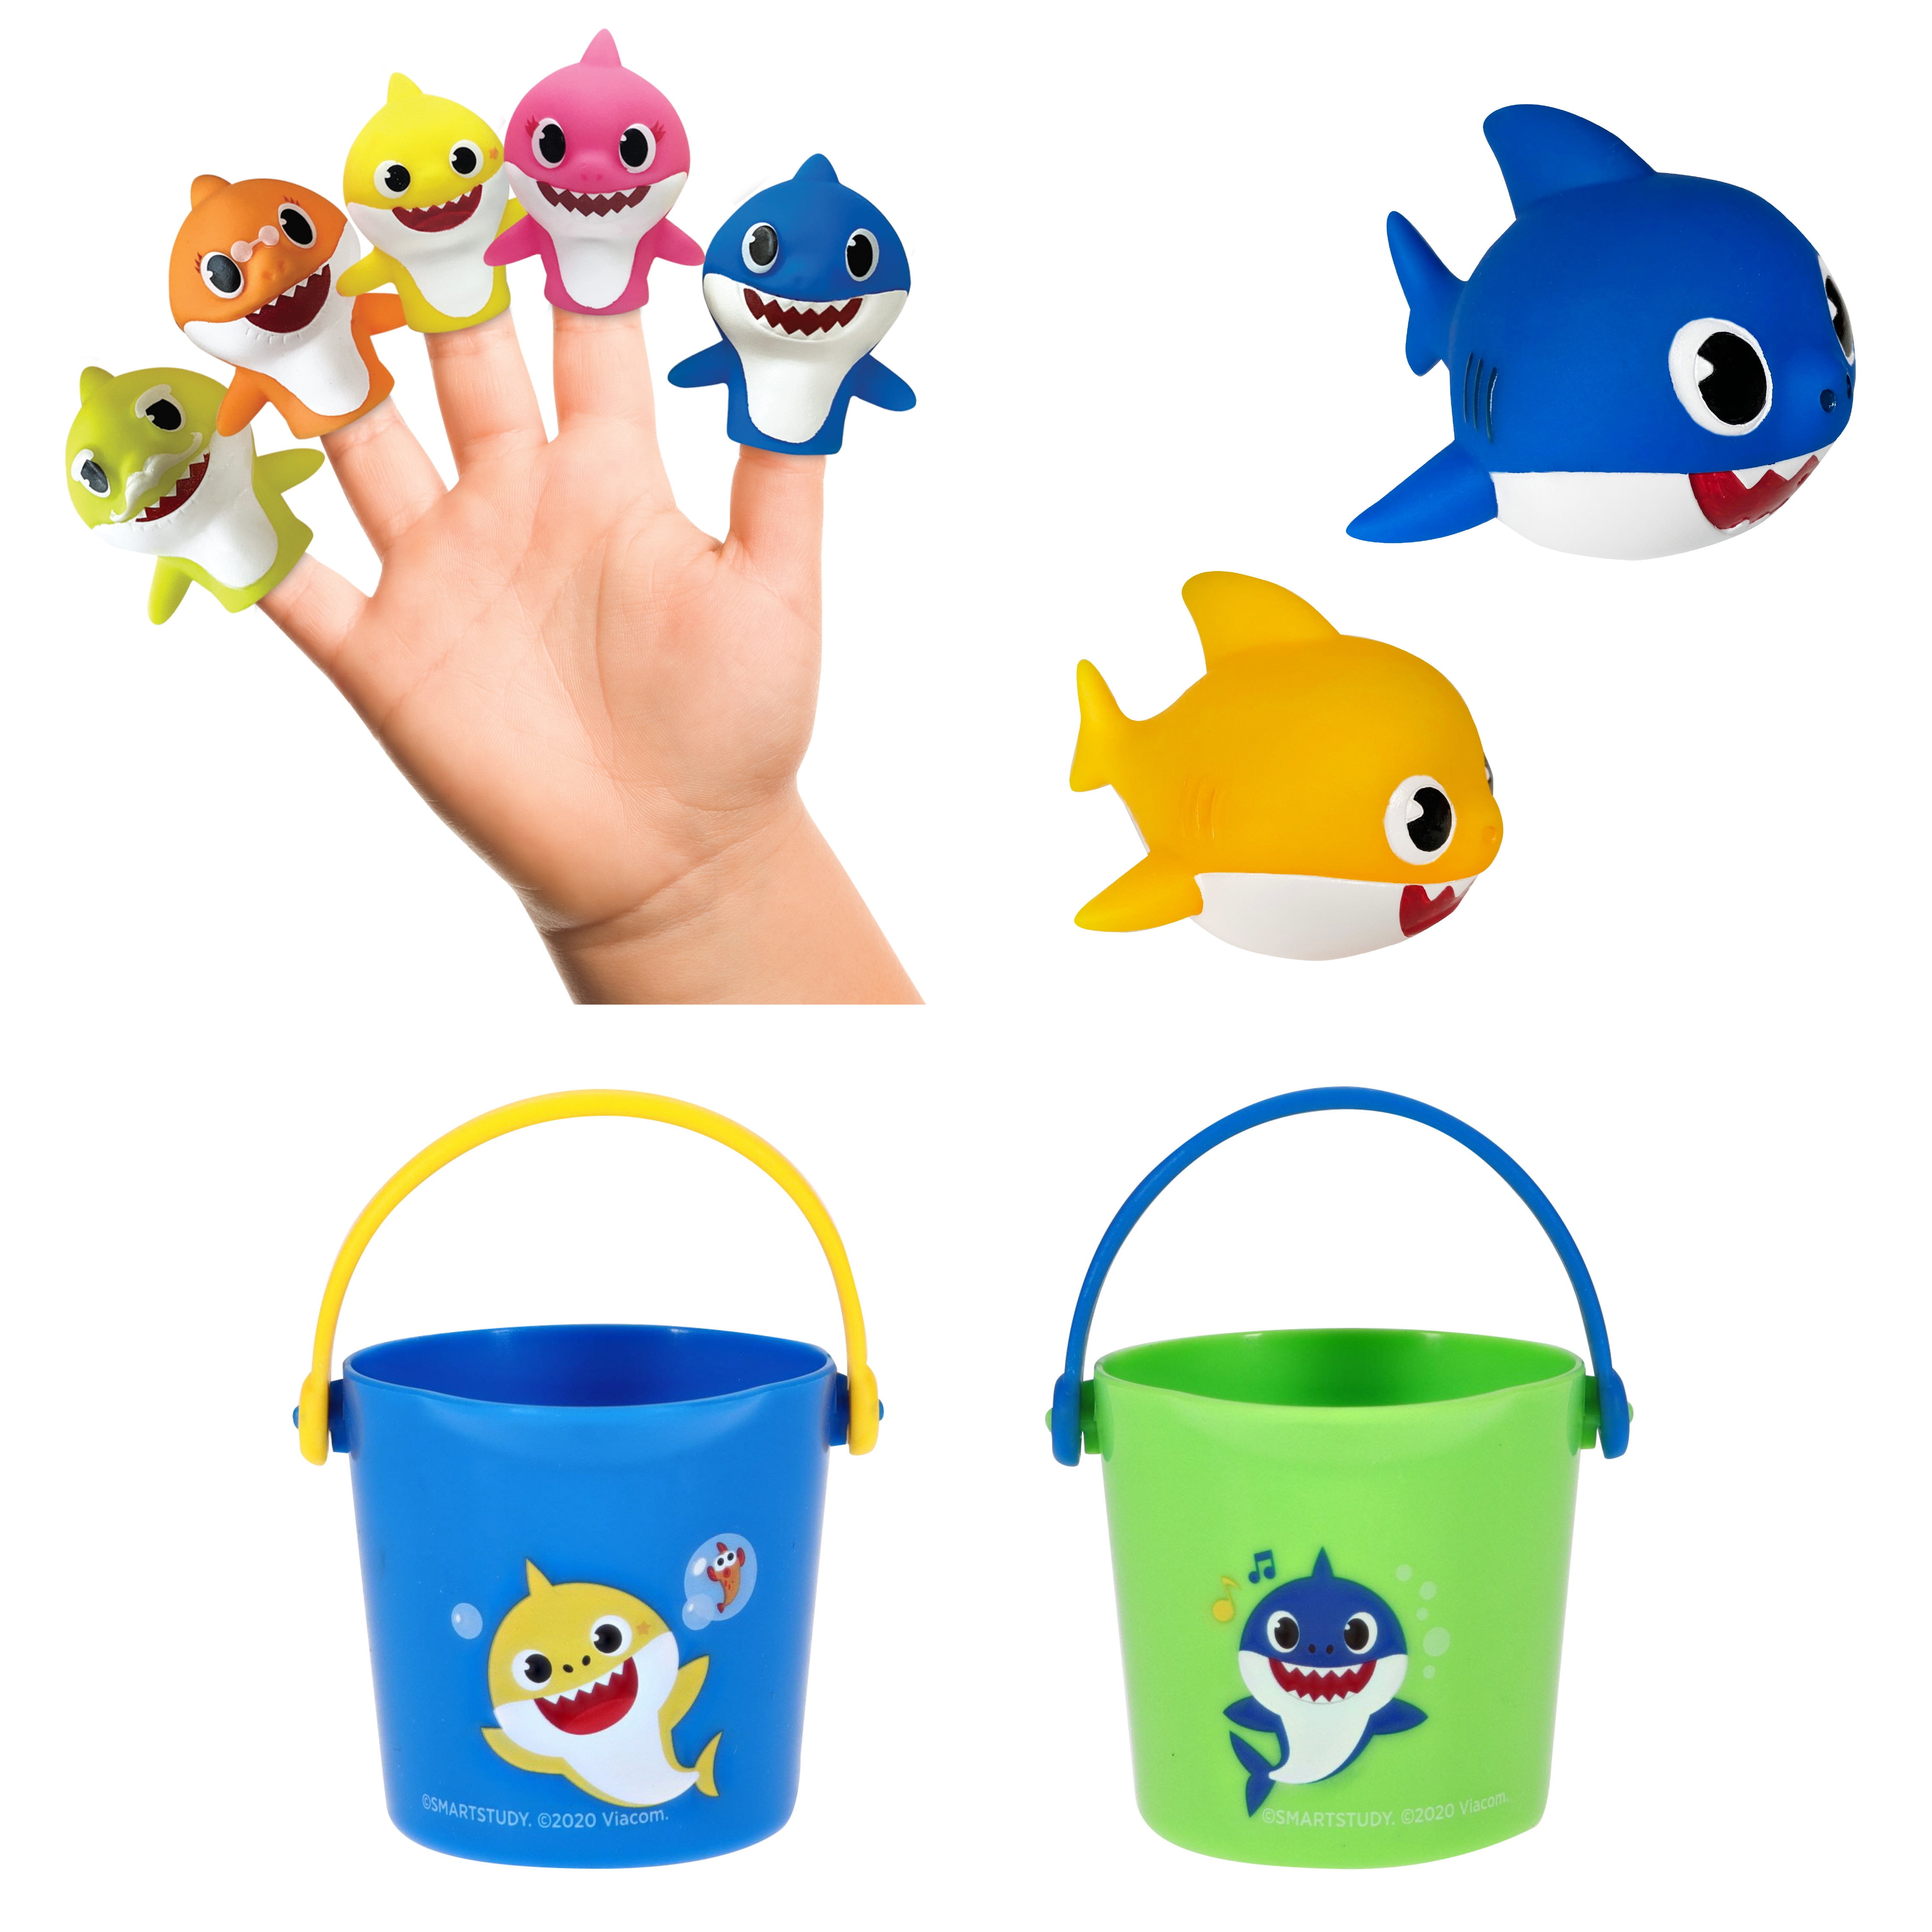 PINKFONG Baby Shark Family Bath Towel Glove Bathing Time Play Toy Kids 4 Colors 